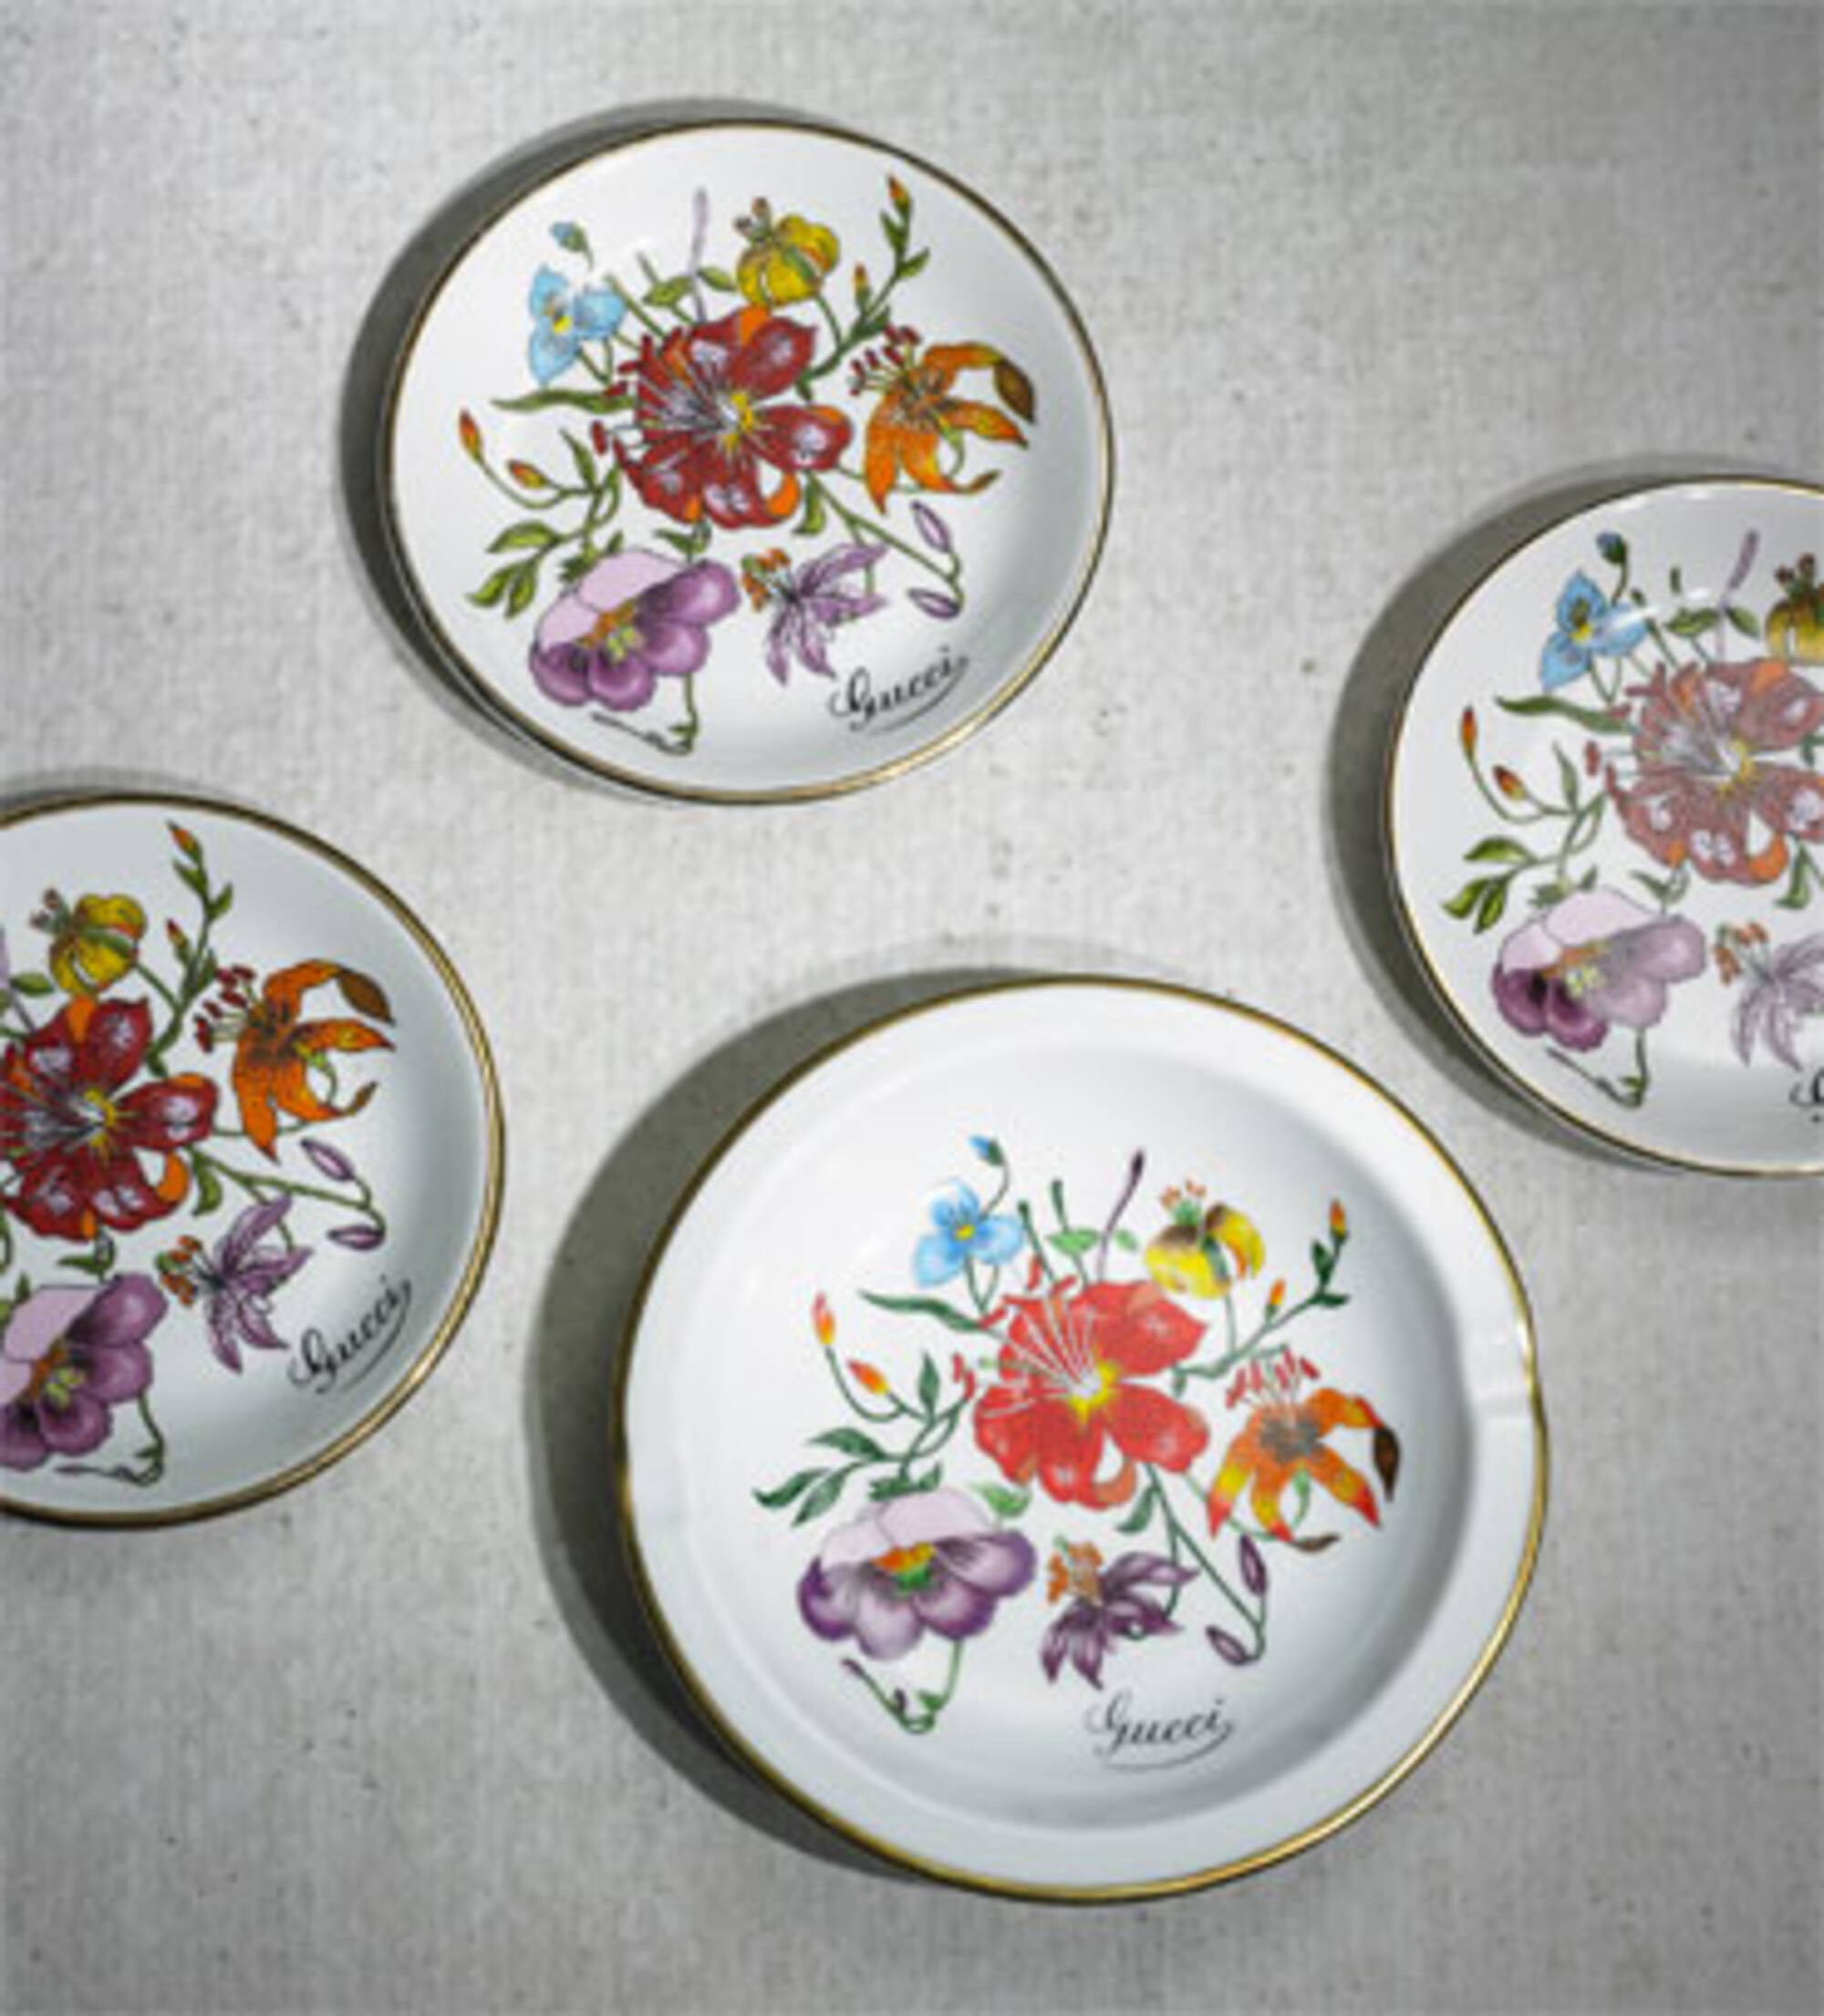 517: GUCCI, plates, set of three < Mass Modern, 21 June 2008 < Auctions |  Wright: Auctions of Art and Design